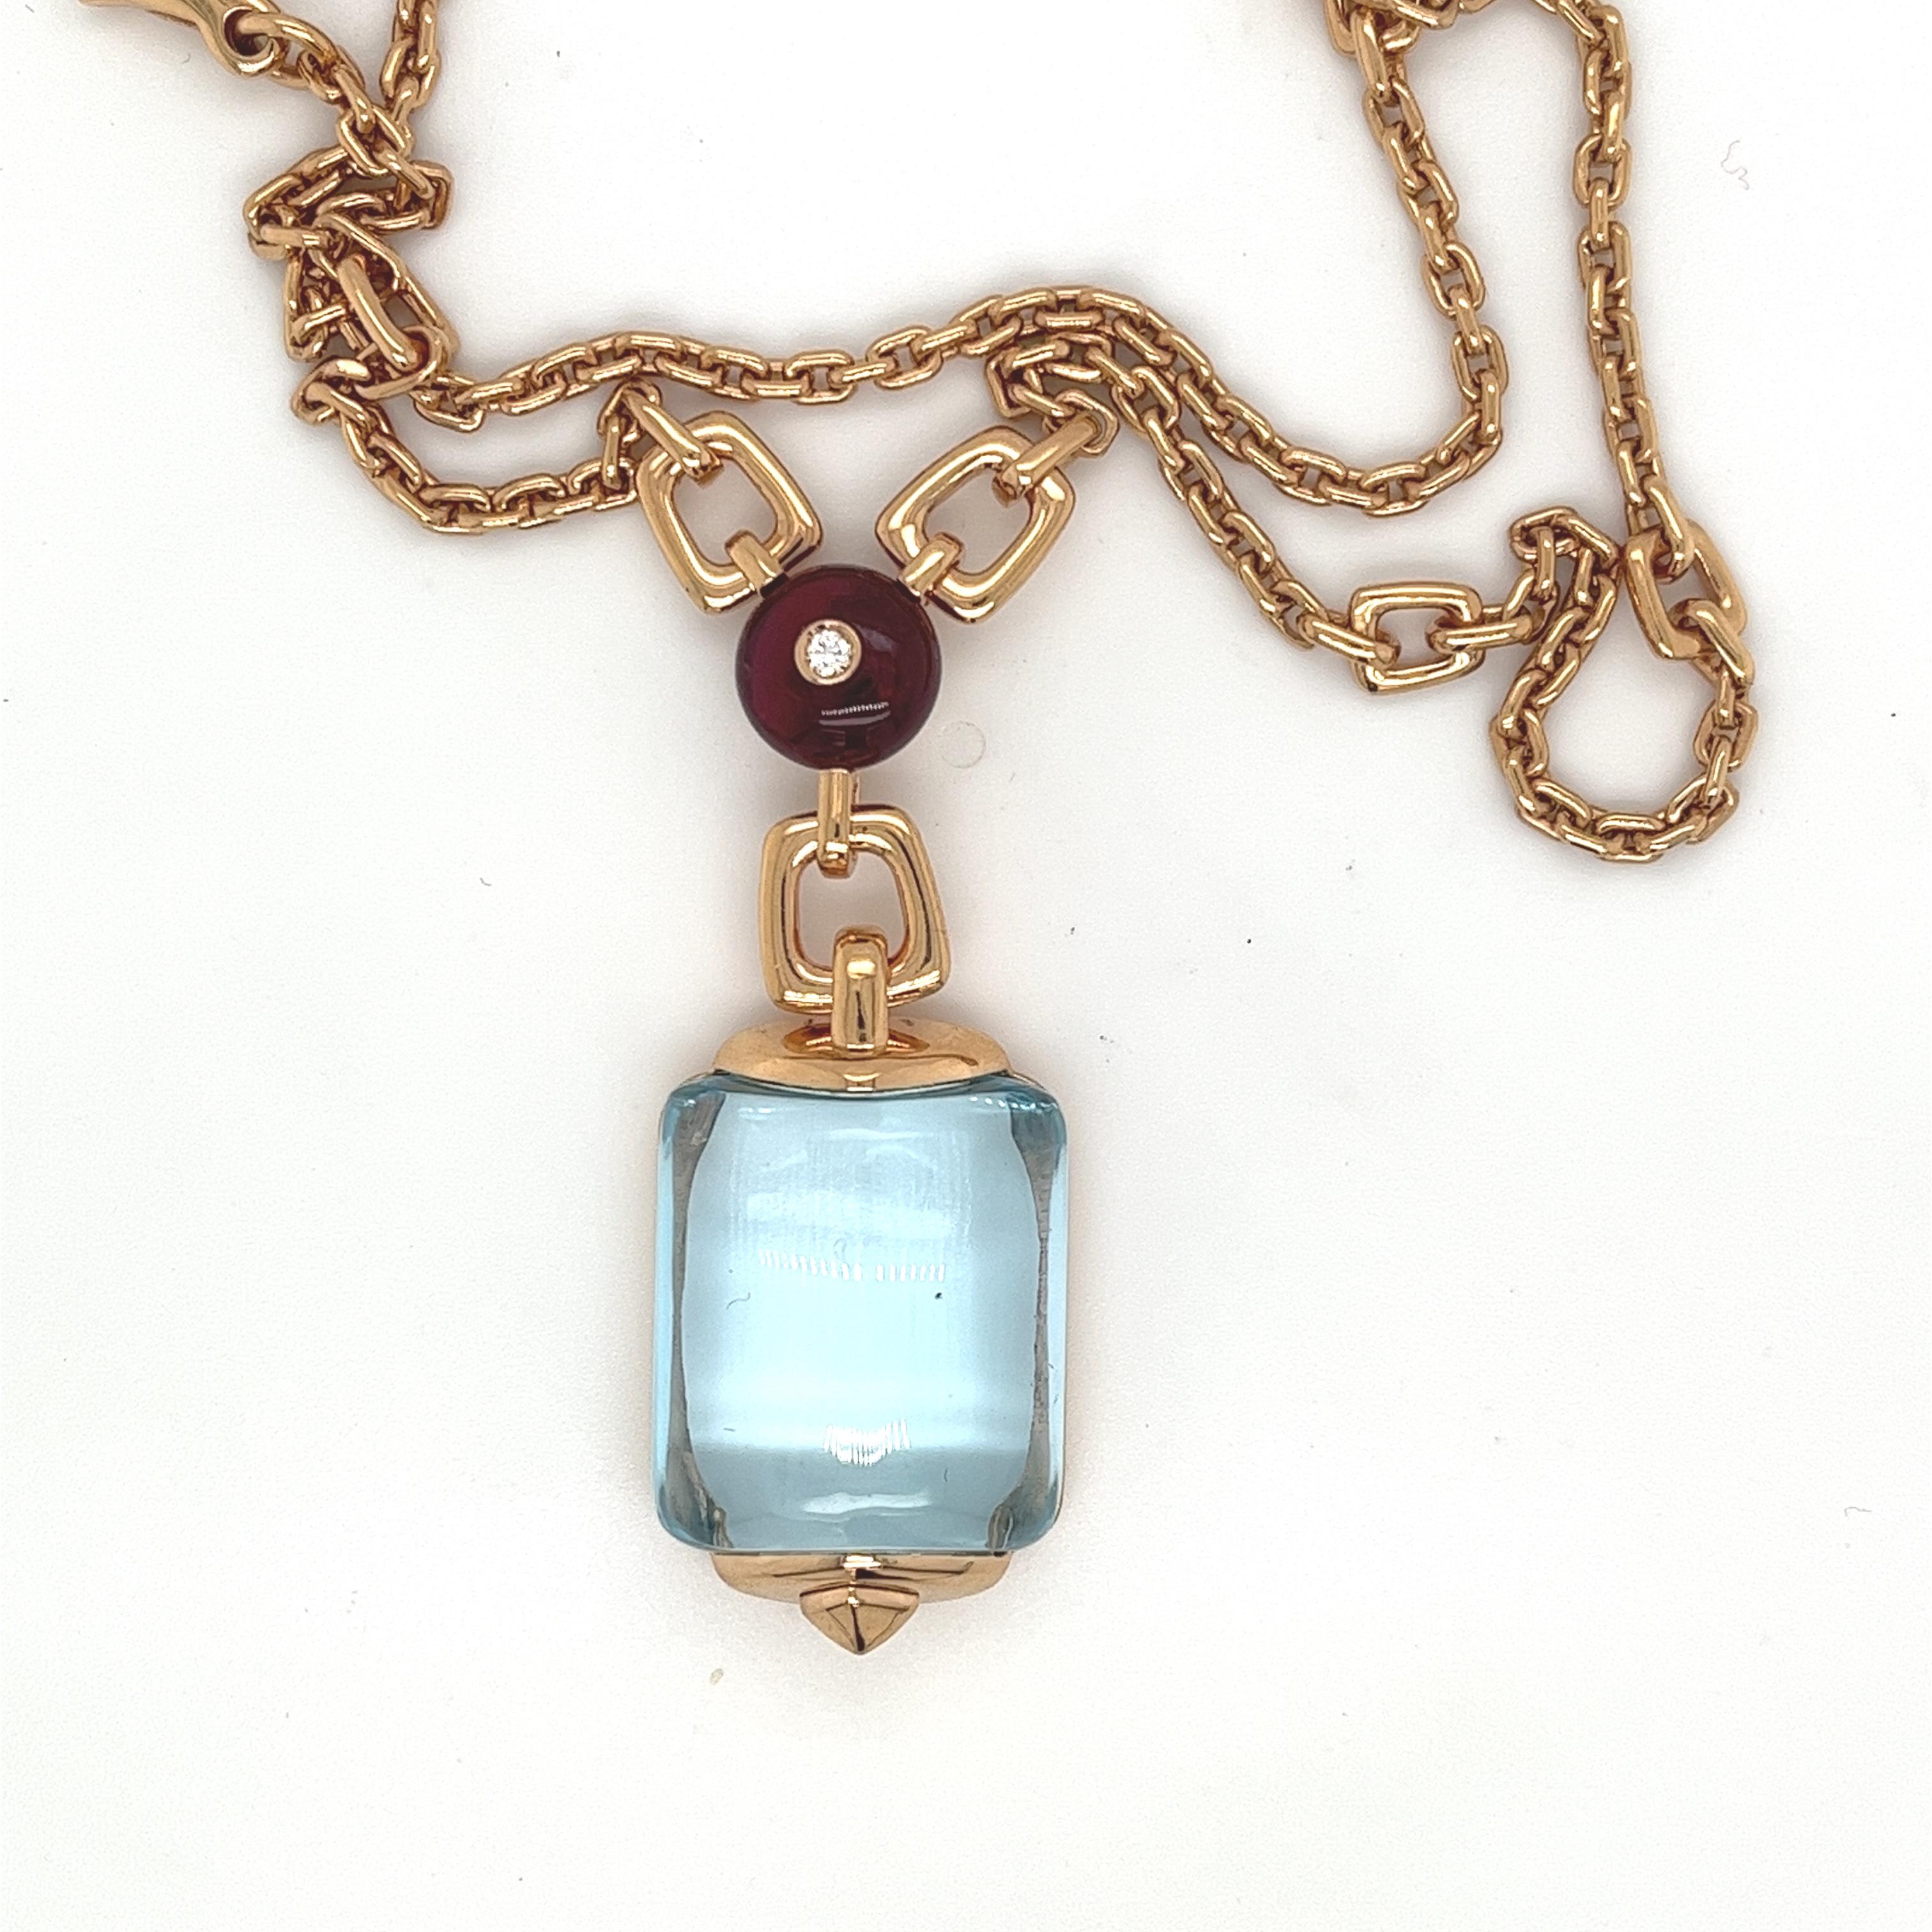 Offered here is a Bulgari handmade link chain necklace, with a large blue topaz dangling on a Ruby bead centered with a diamond.
Made in 18kt yellow gold weighing 31.40 grams, 18 inches in length.
Topaz is approx. 19mm by 17mm wide.
Hallmarked with